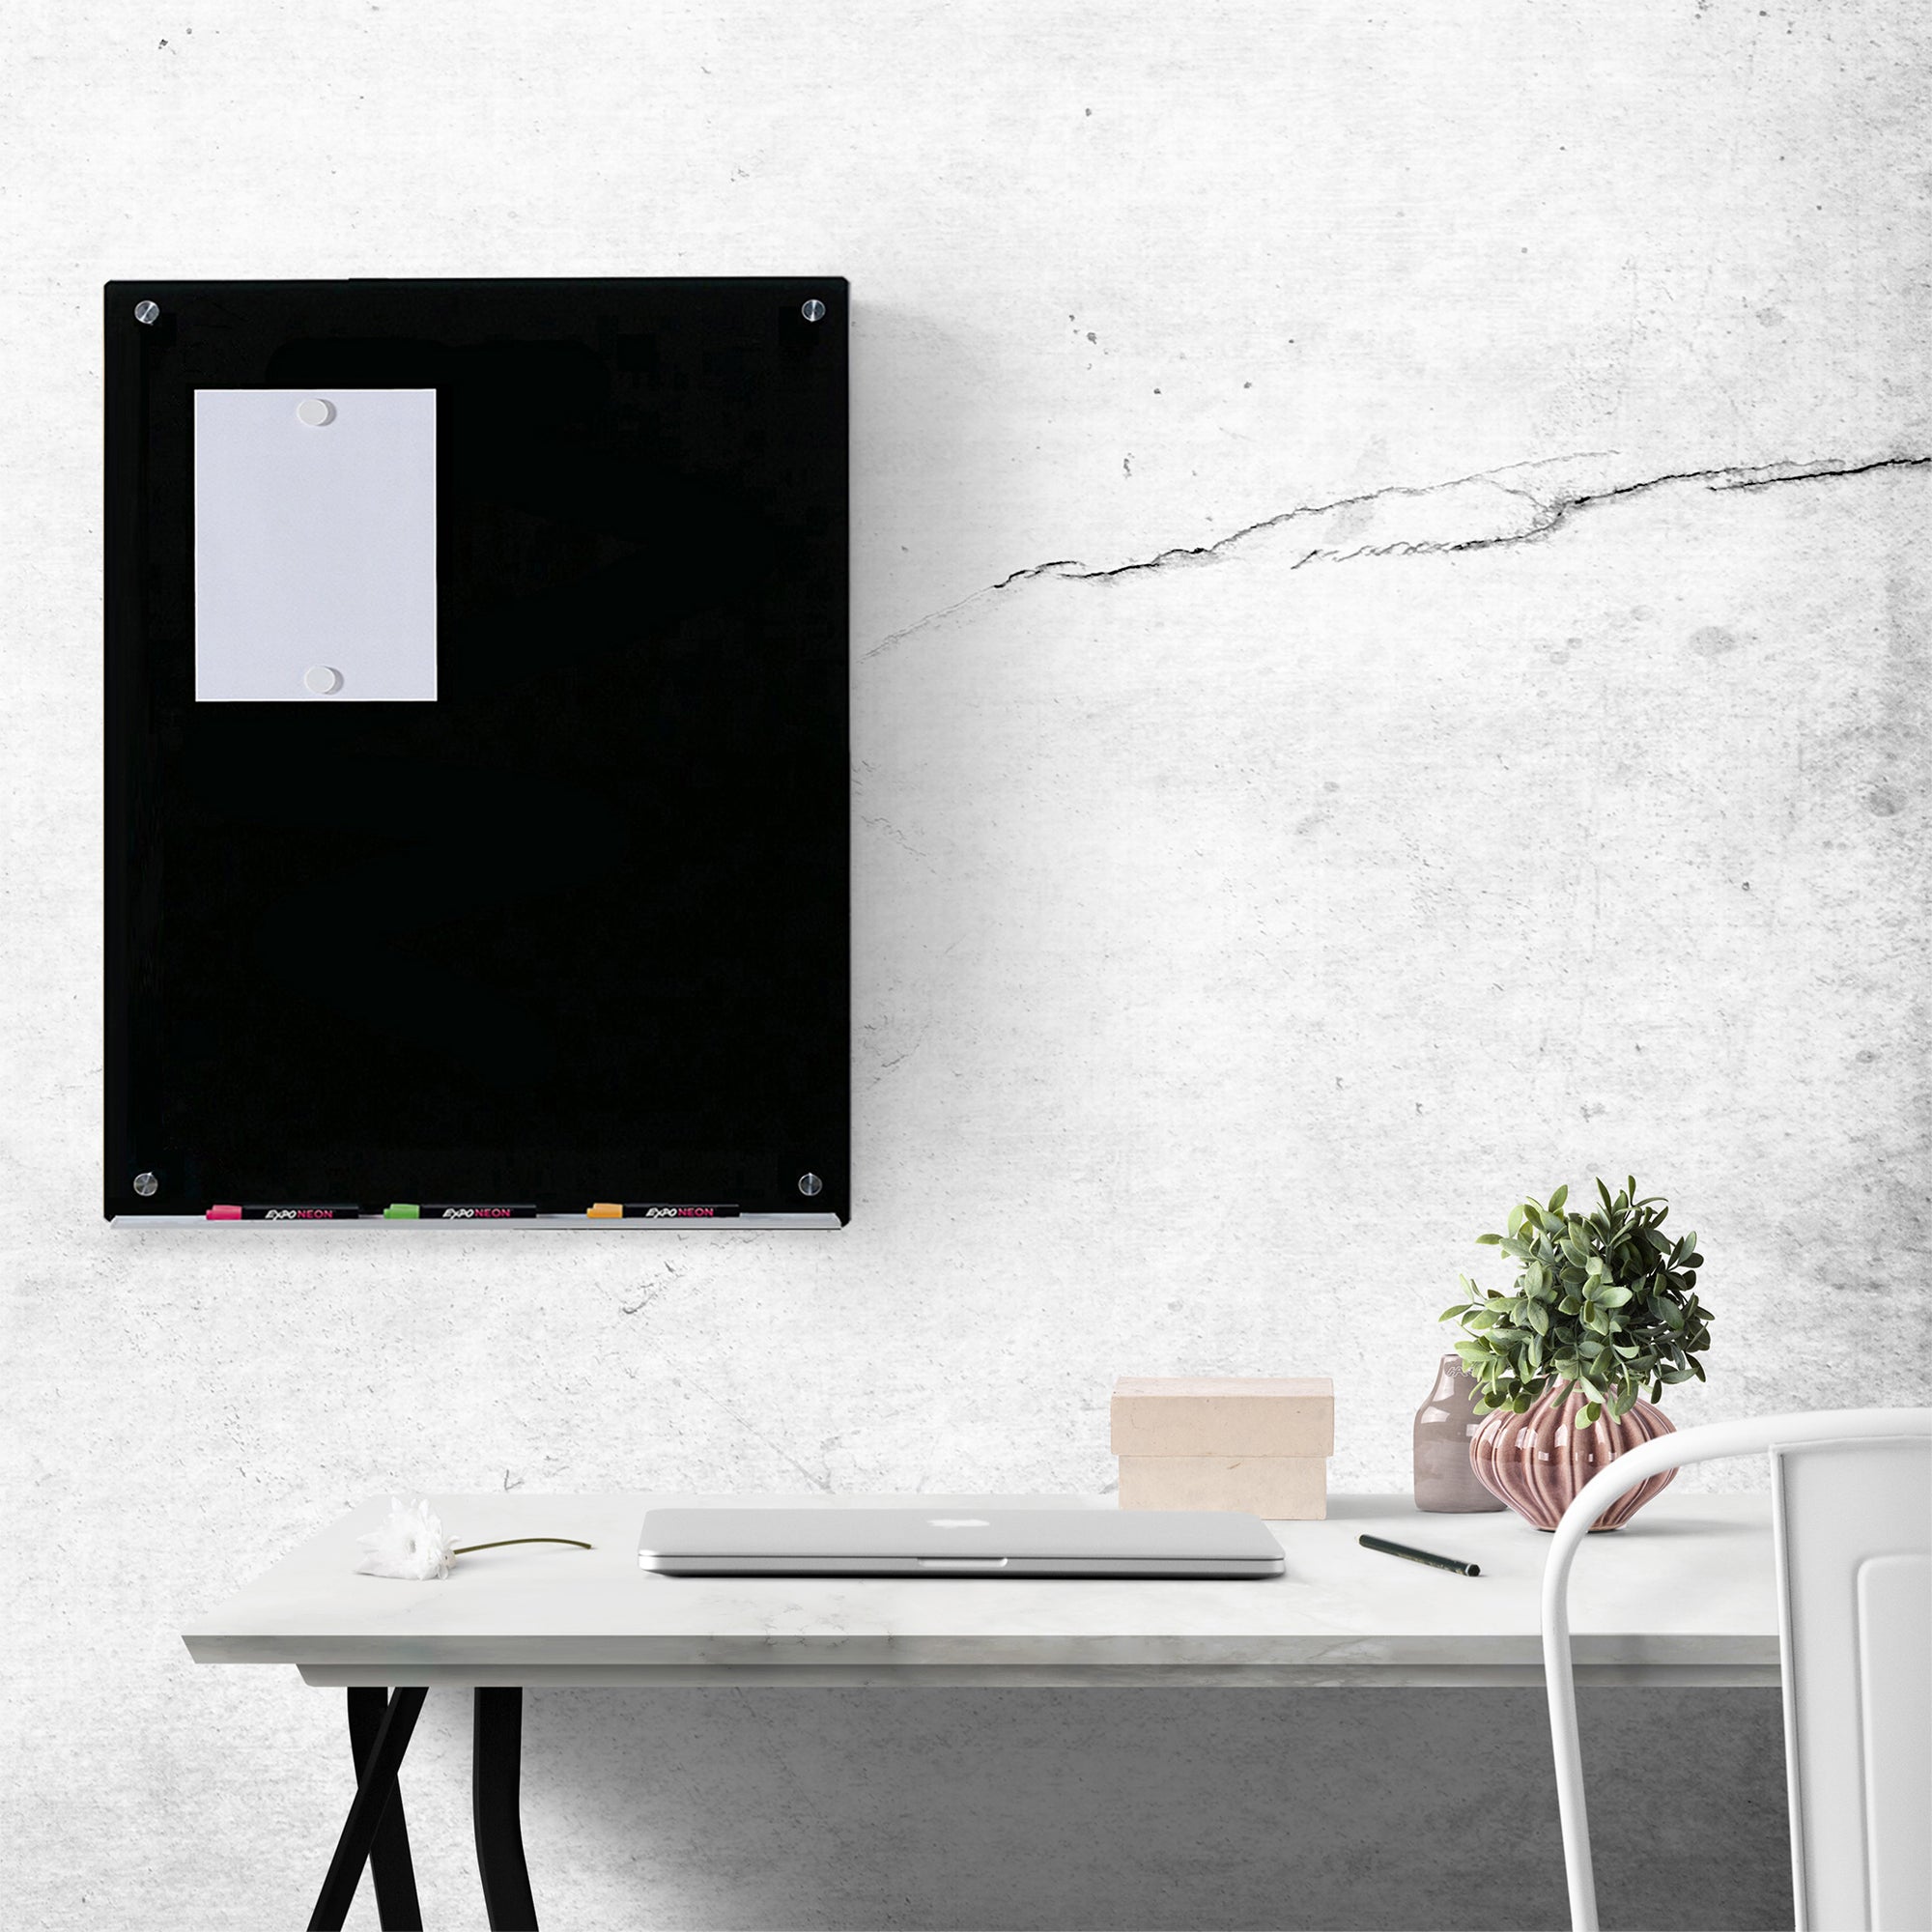 Wall Mounted Black Magnetic Audio-Visual Direct Glass board mounted in a home office. Includes 2 Neodymium Magnets holding a paper on the magnetic black surface. 